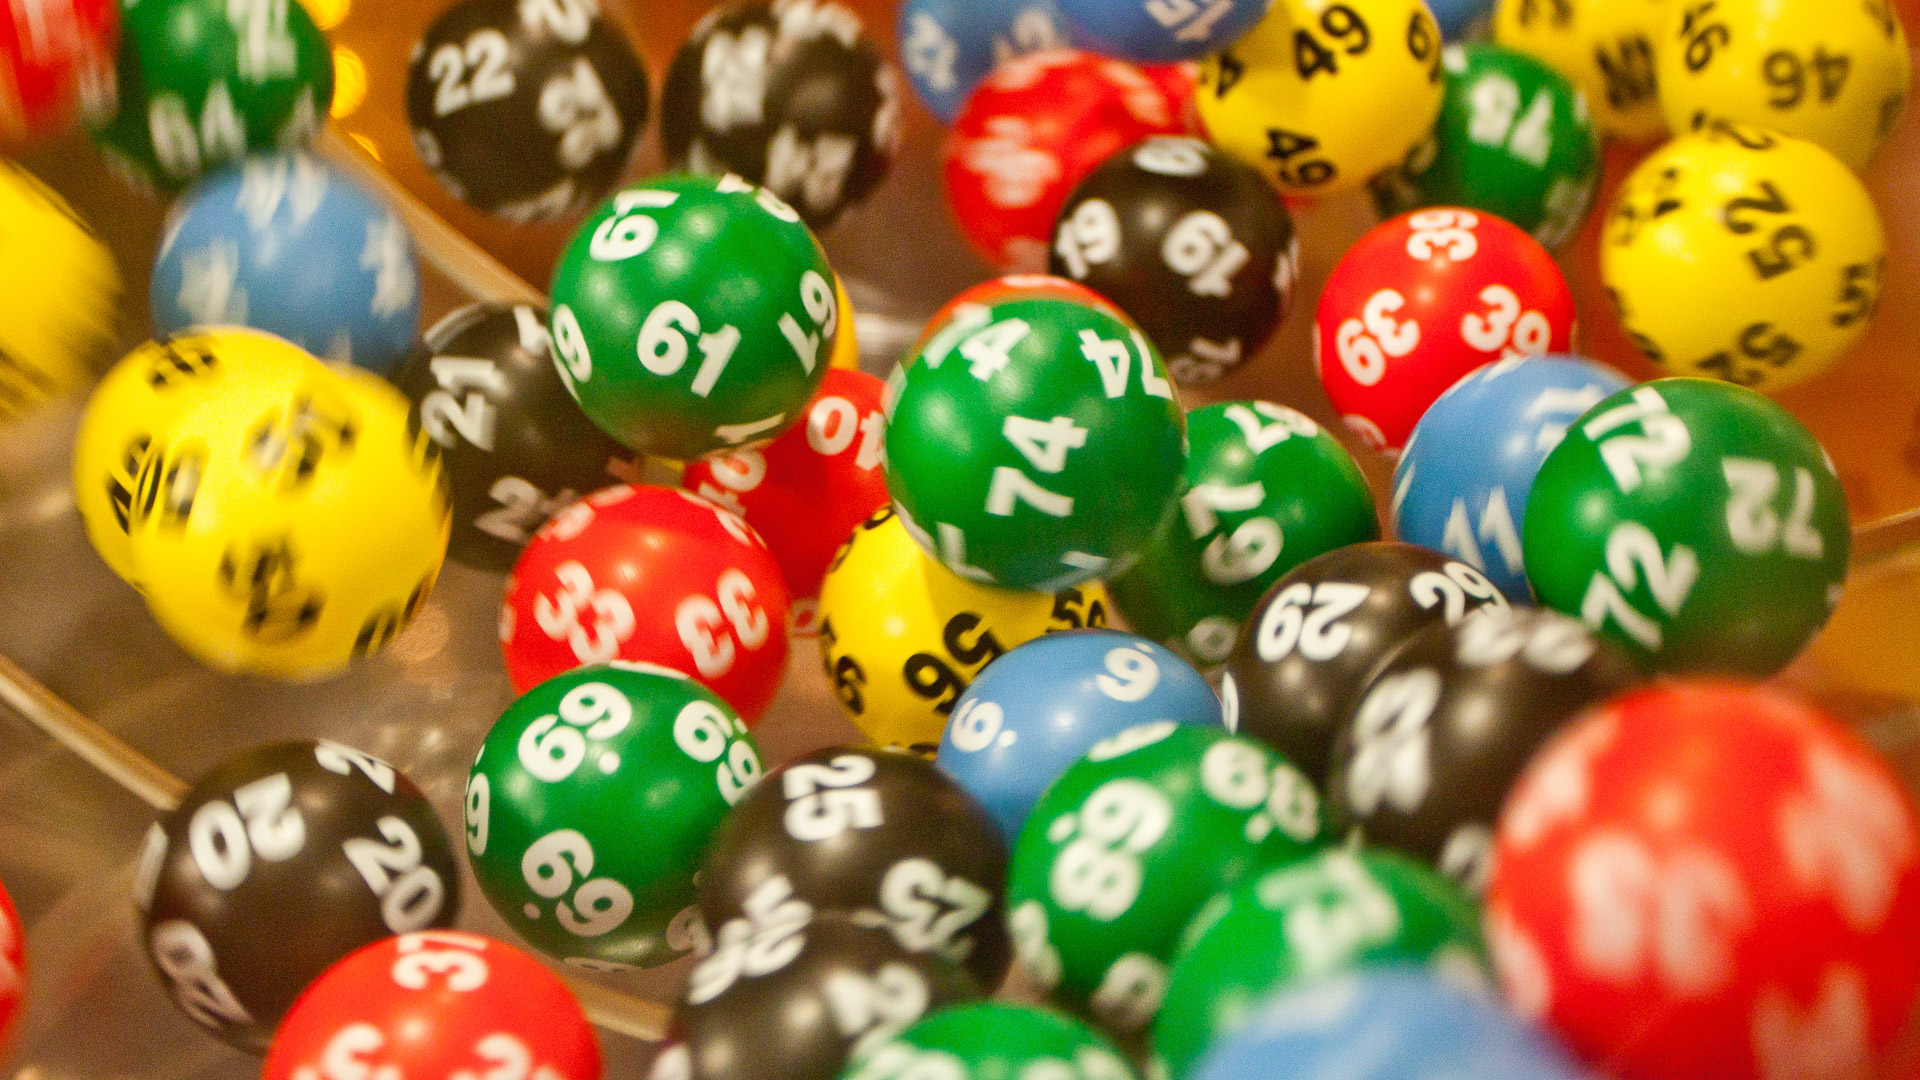 Can You Play The Lottery Online In The U.S. Without Breaking Any Laws?